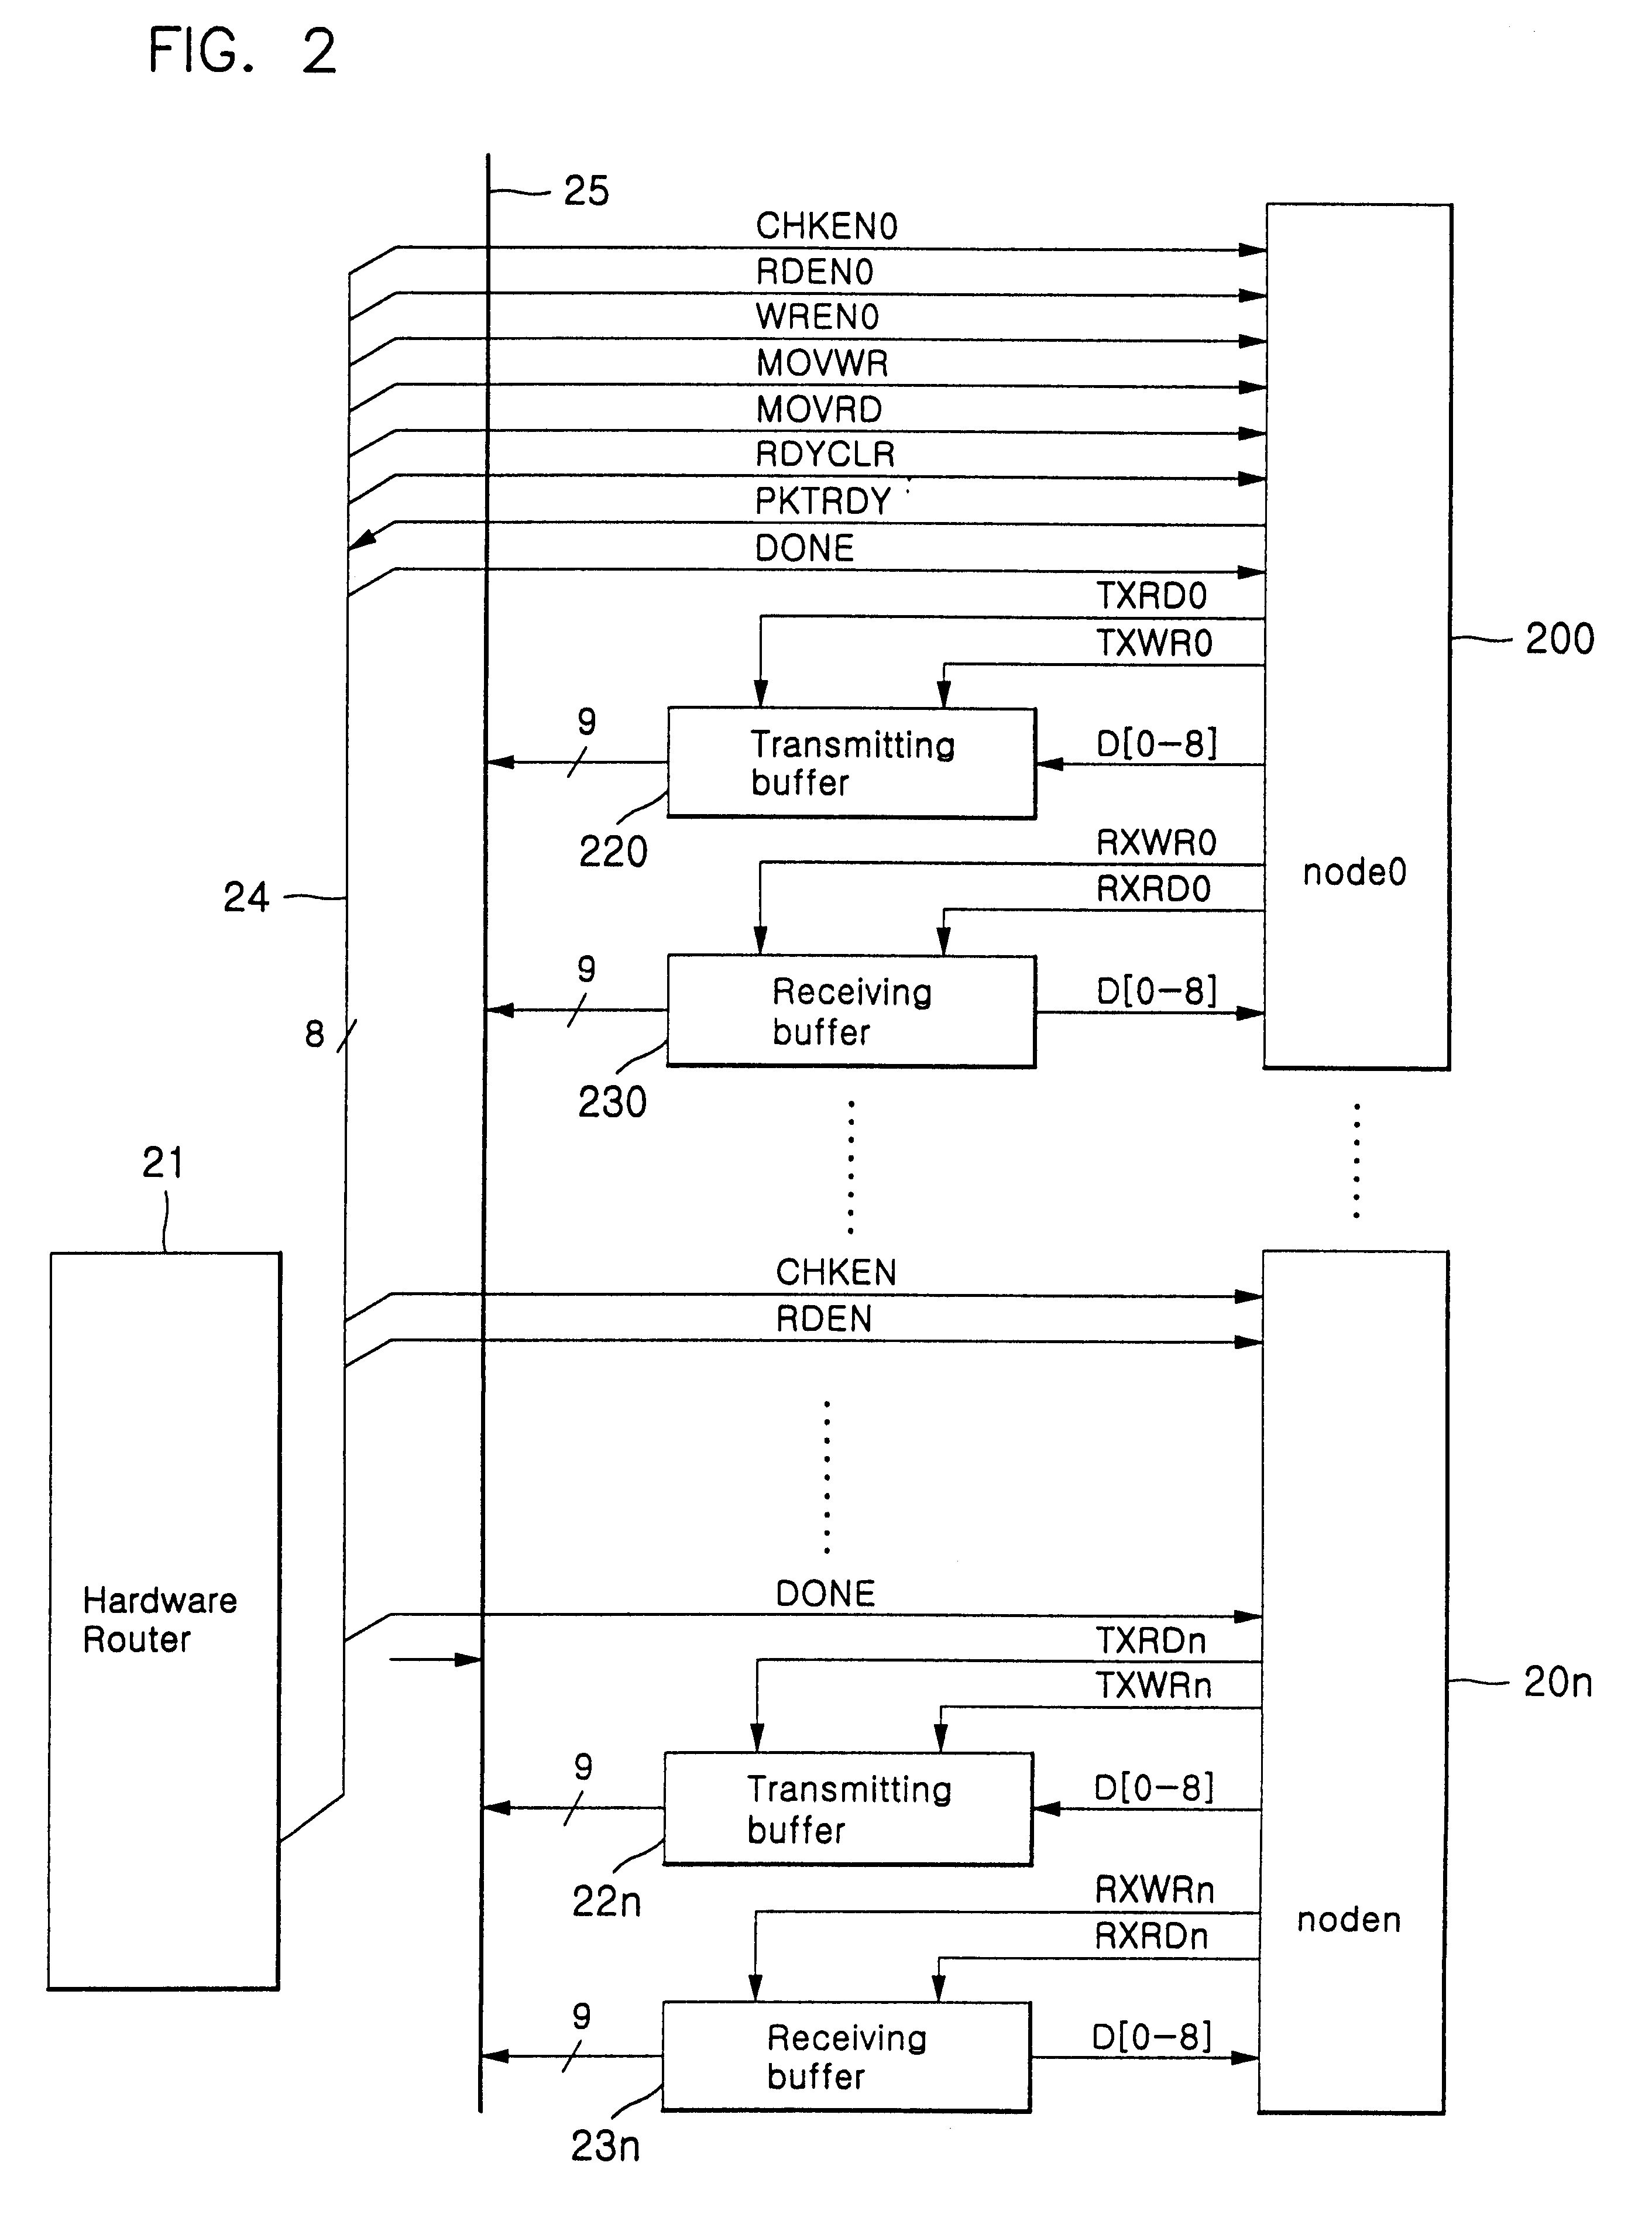 Packet data transmitting apparatus, and method therefor